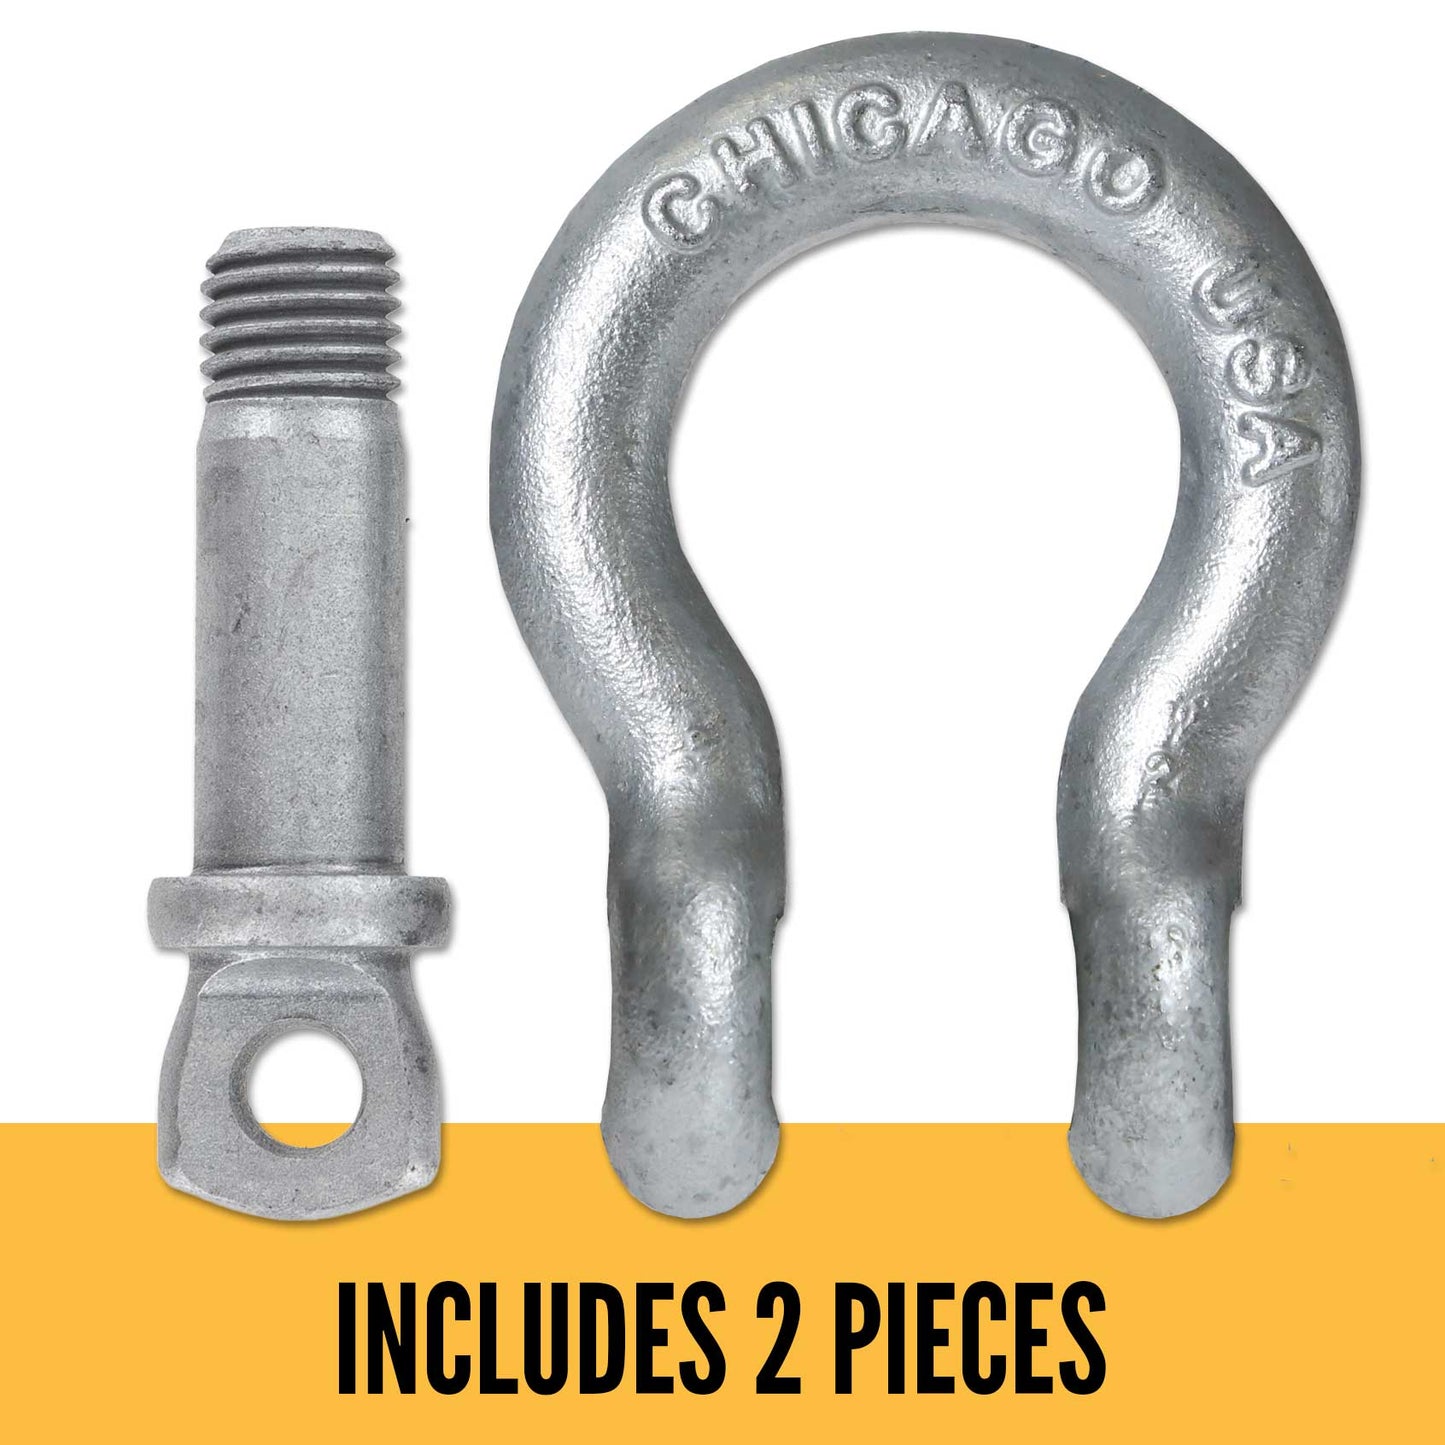 Screw Pin Anchor Shackle - Chicago Hardware - 7/8" Galvanized Steel - 6.5 Ton parts of a shackle